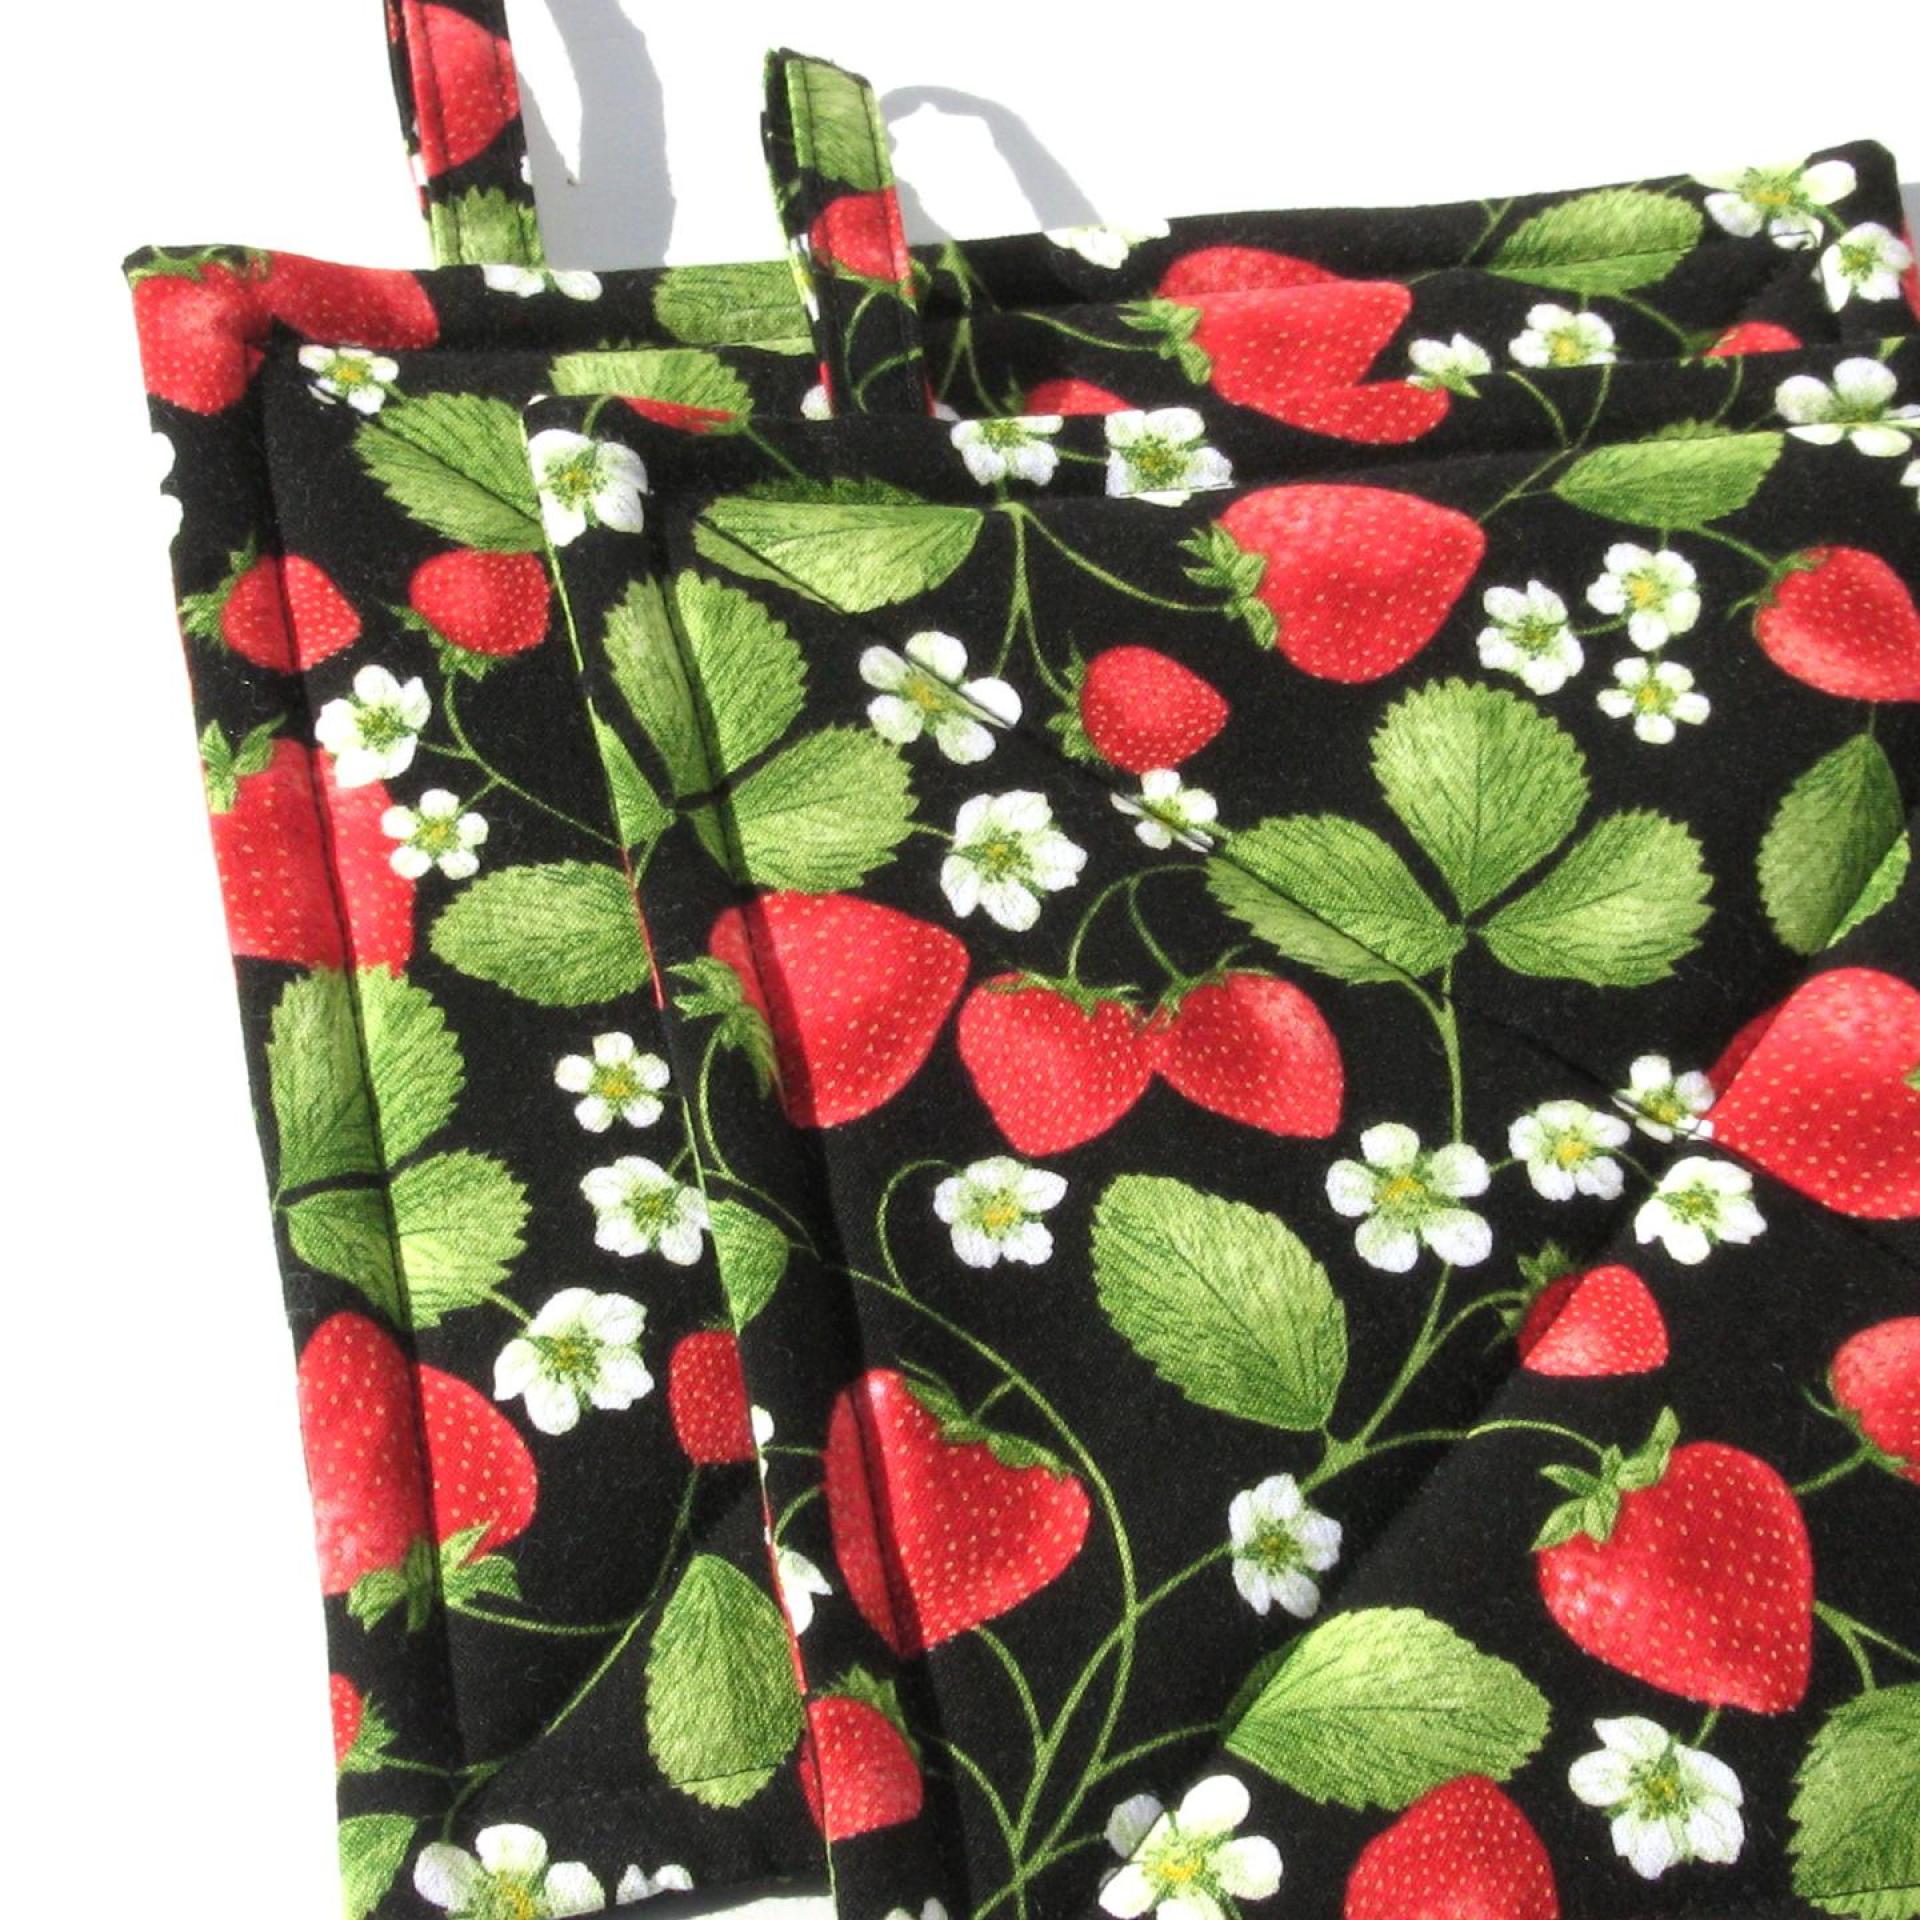 Luscious Strawberries Potholders, Red Berries with Leaves & Blossoms on a Black Background, USA Handmade Hot Pads, Housewarming Gift